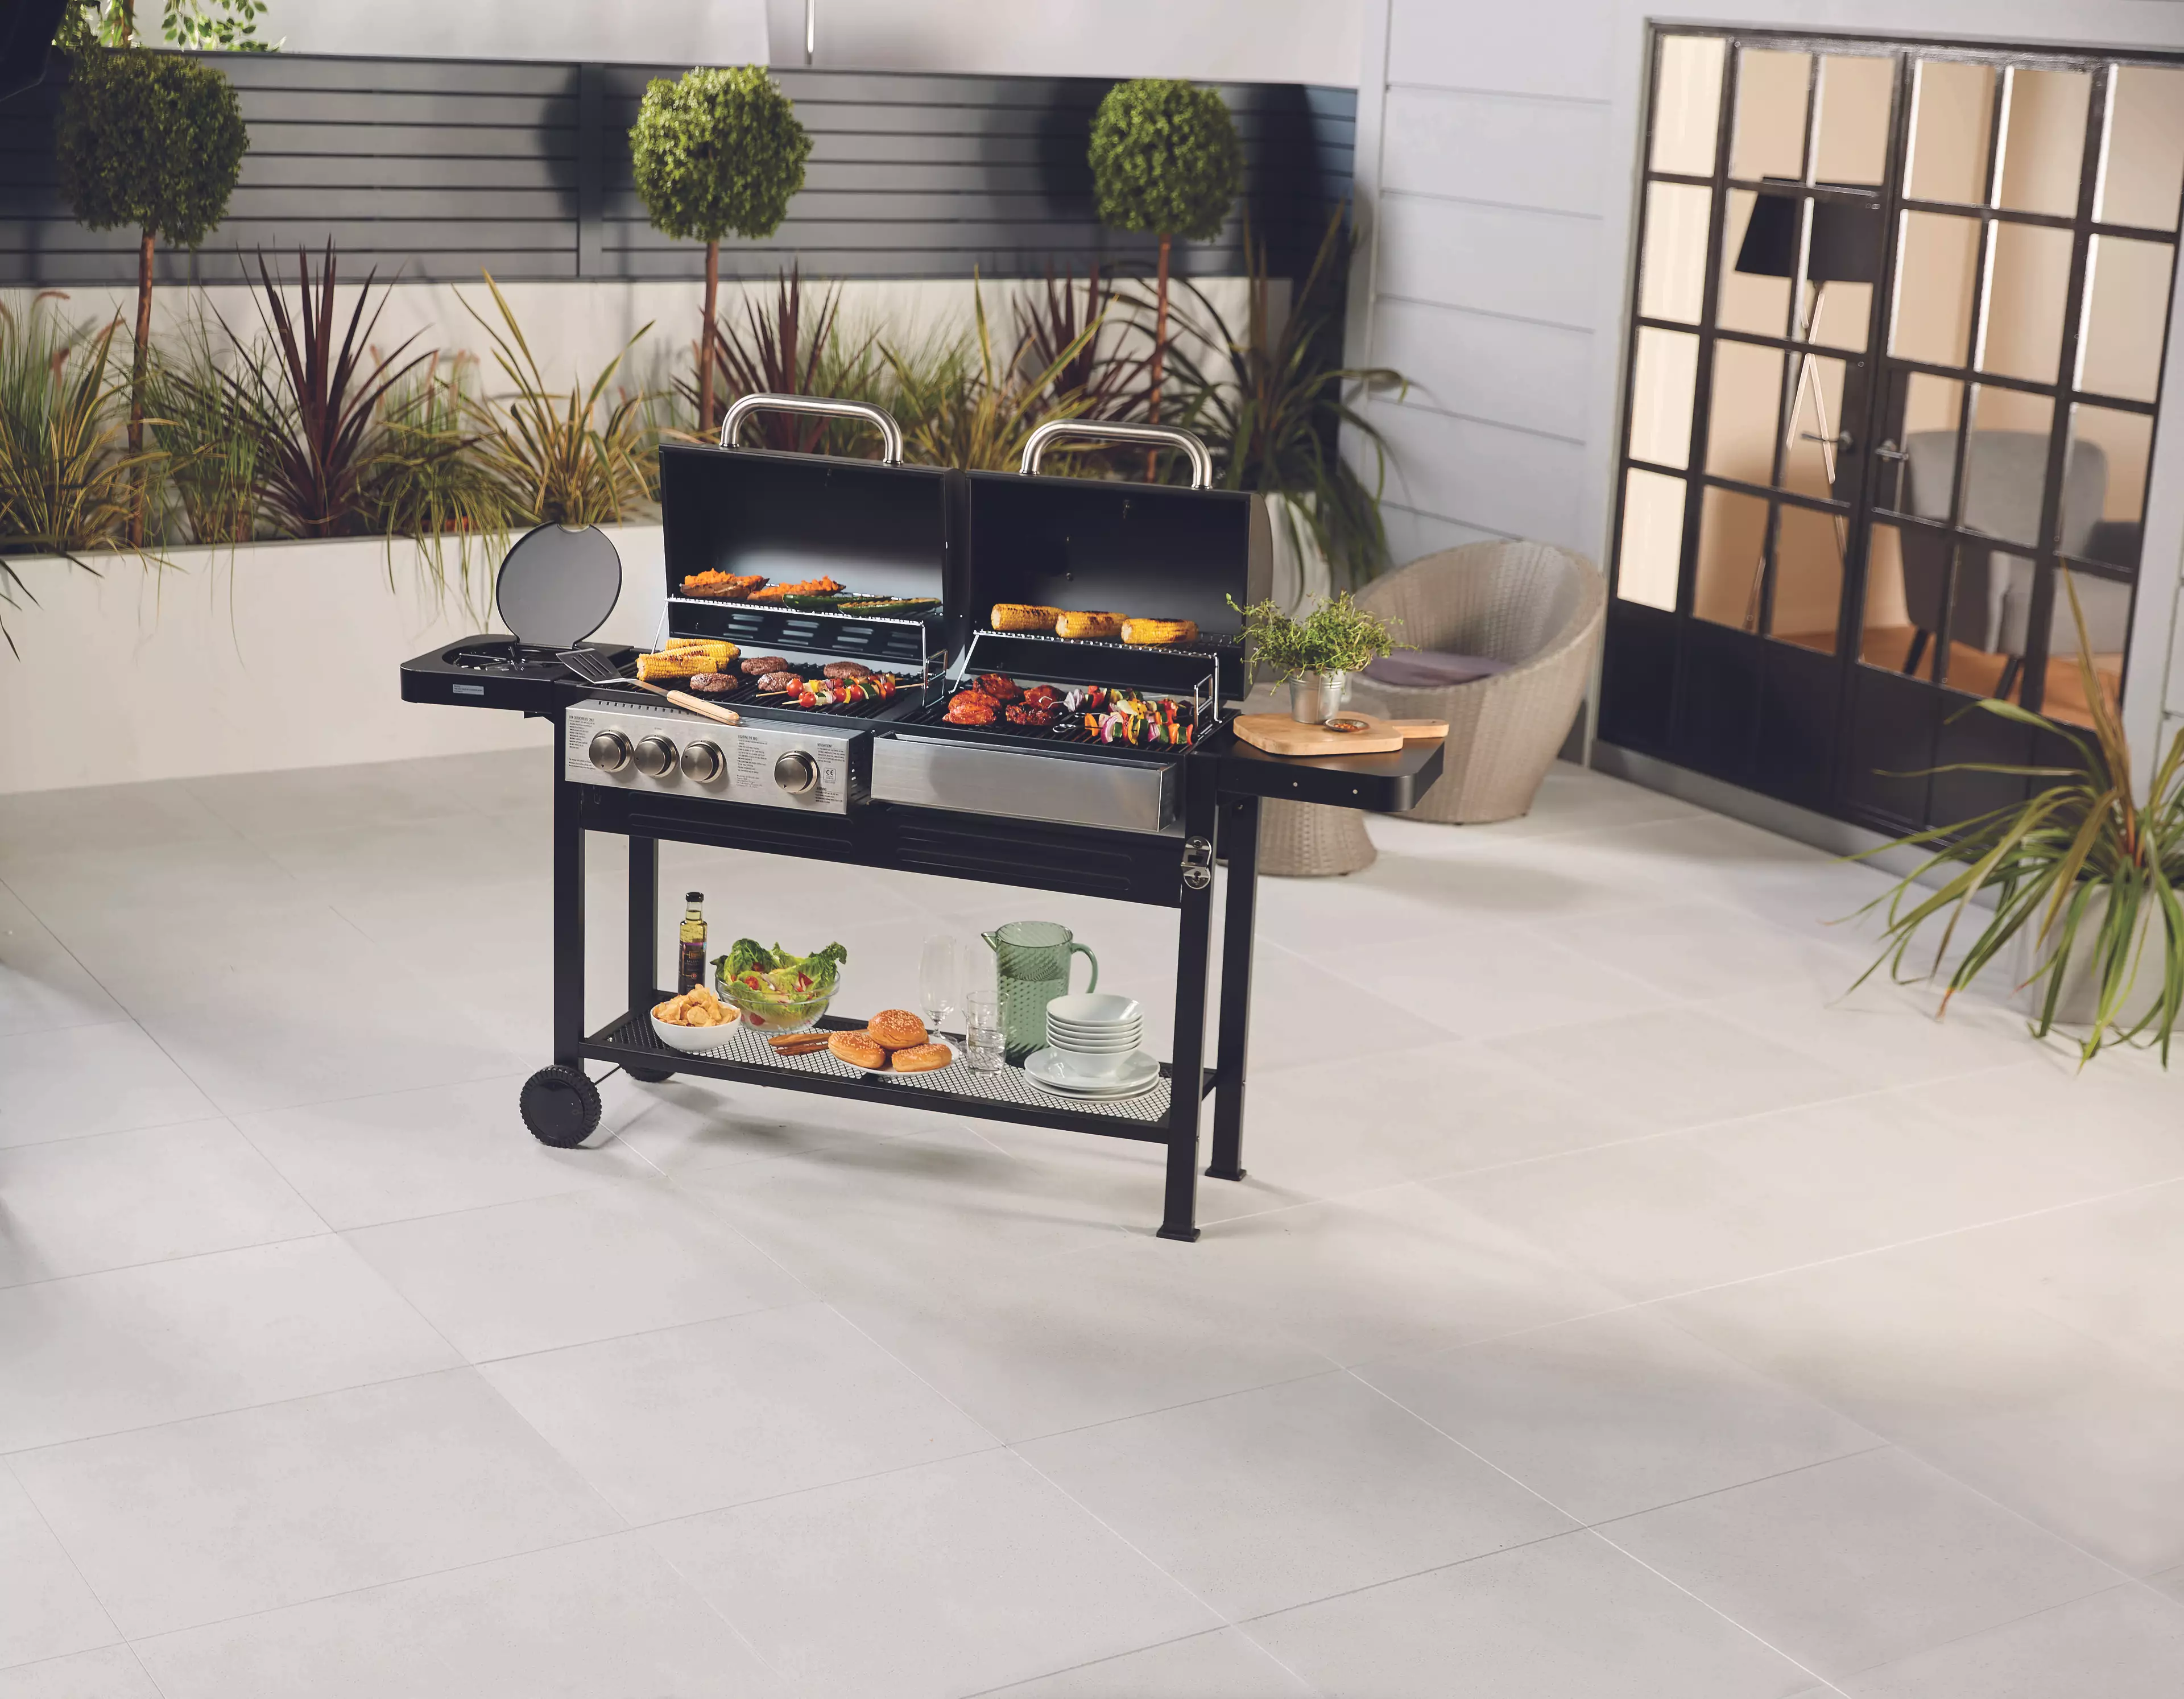 Say hello to the Dual Fuel BBQ, £149.99 (